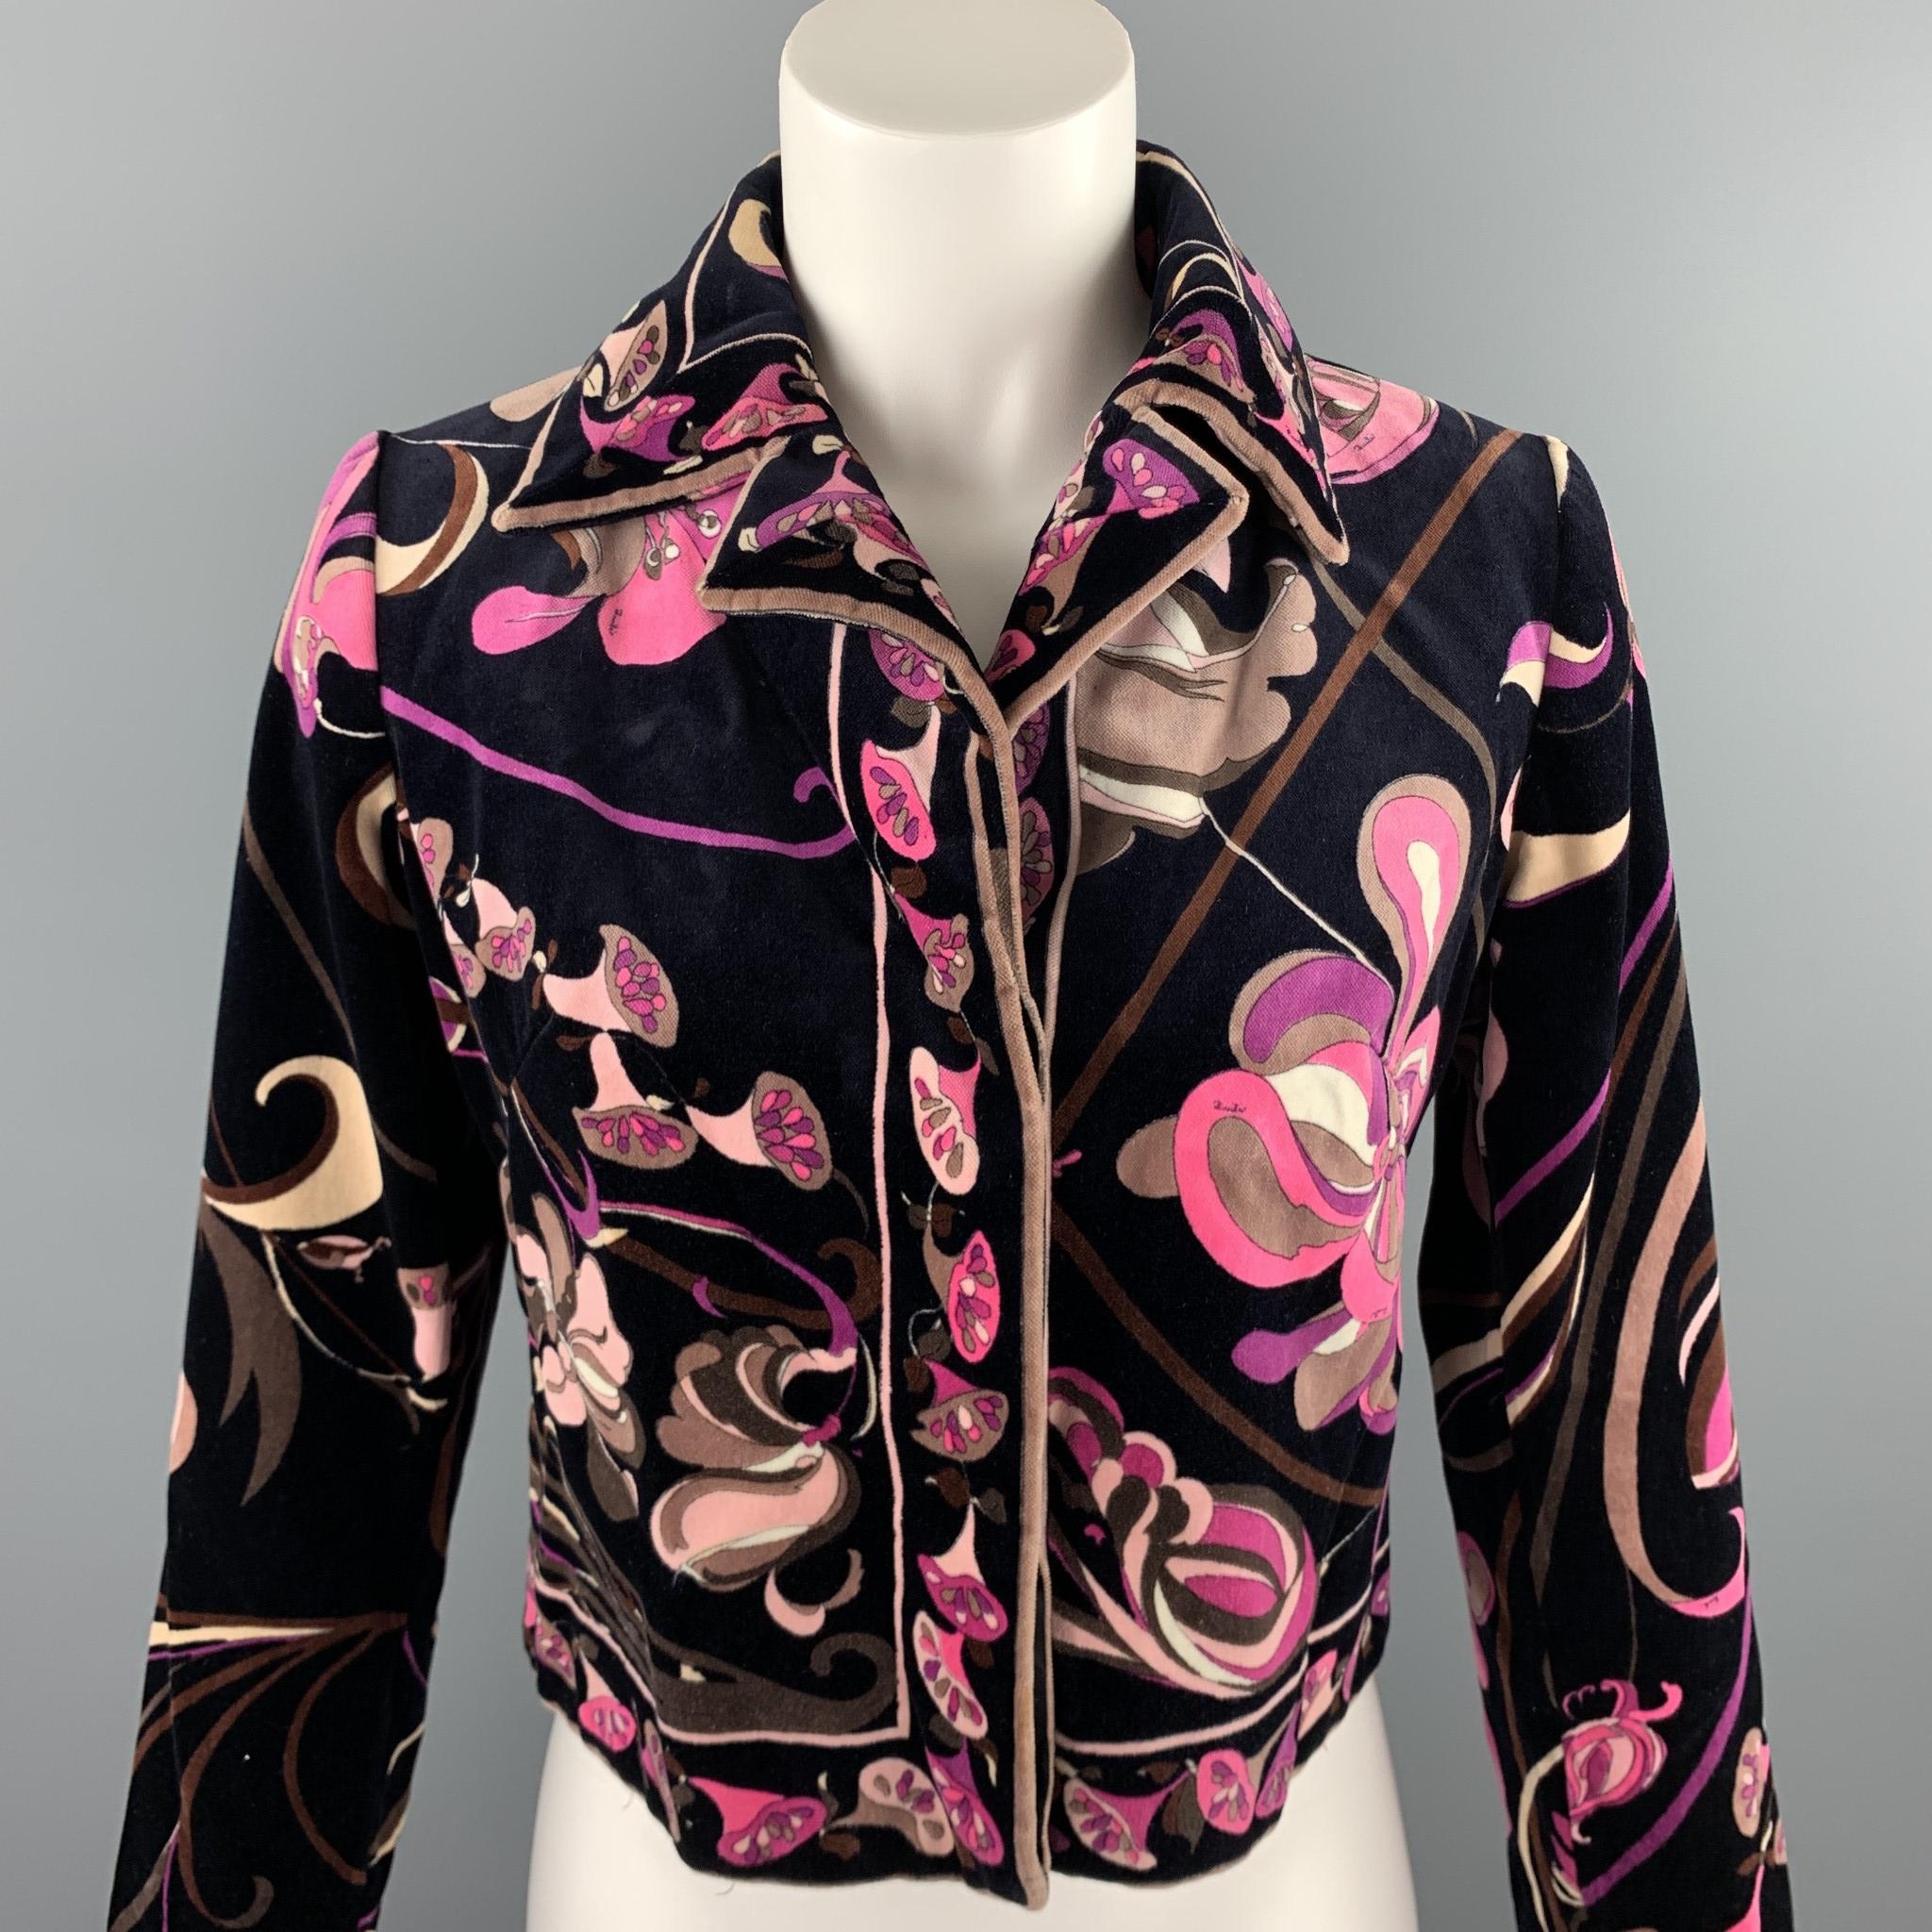 Vintage EMILIO PUCCI jacket comes in a black & pink floral velvet with a full liner featuring a cropped style, spread collar, and a hidden button closure. Minor wear. As-Is. Matching skirt sold separately. 

Very Good Pre-Owned Condition.
Marked: No